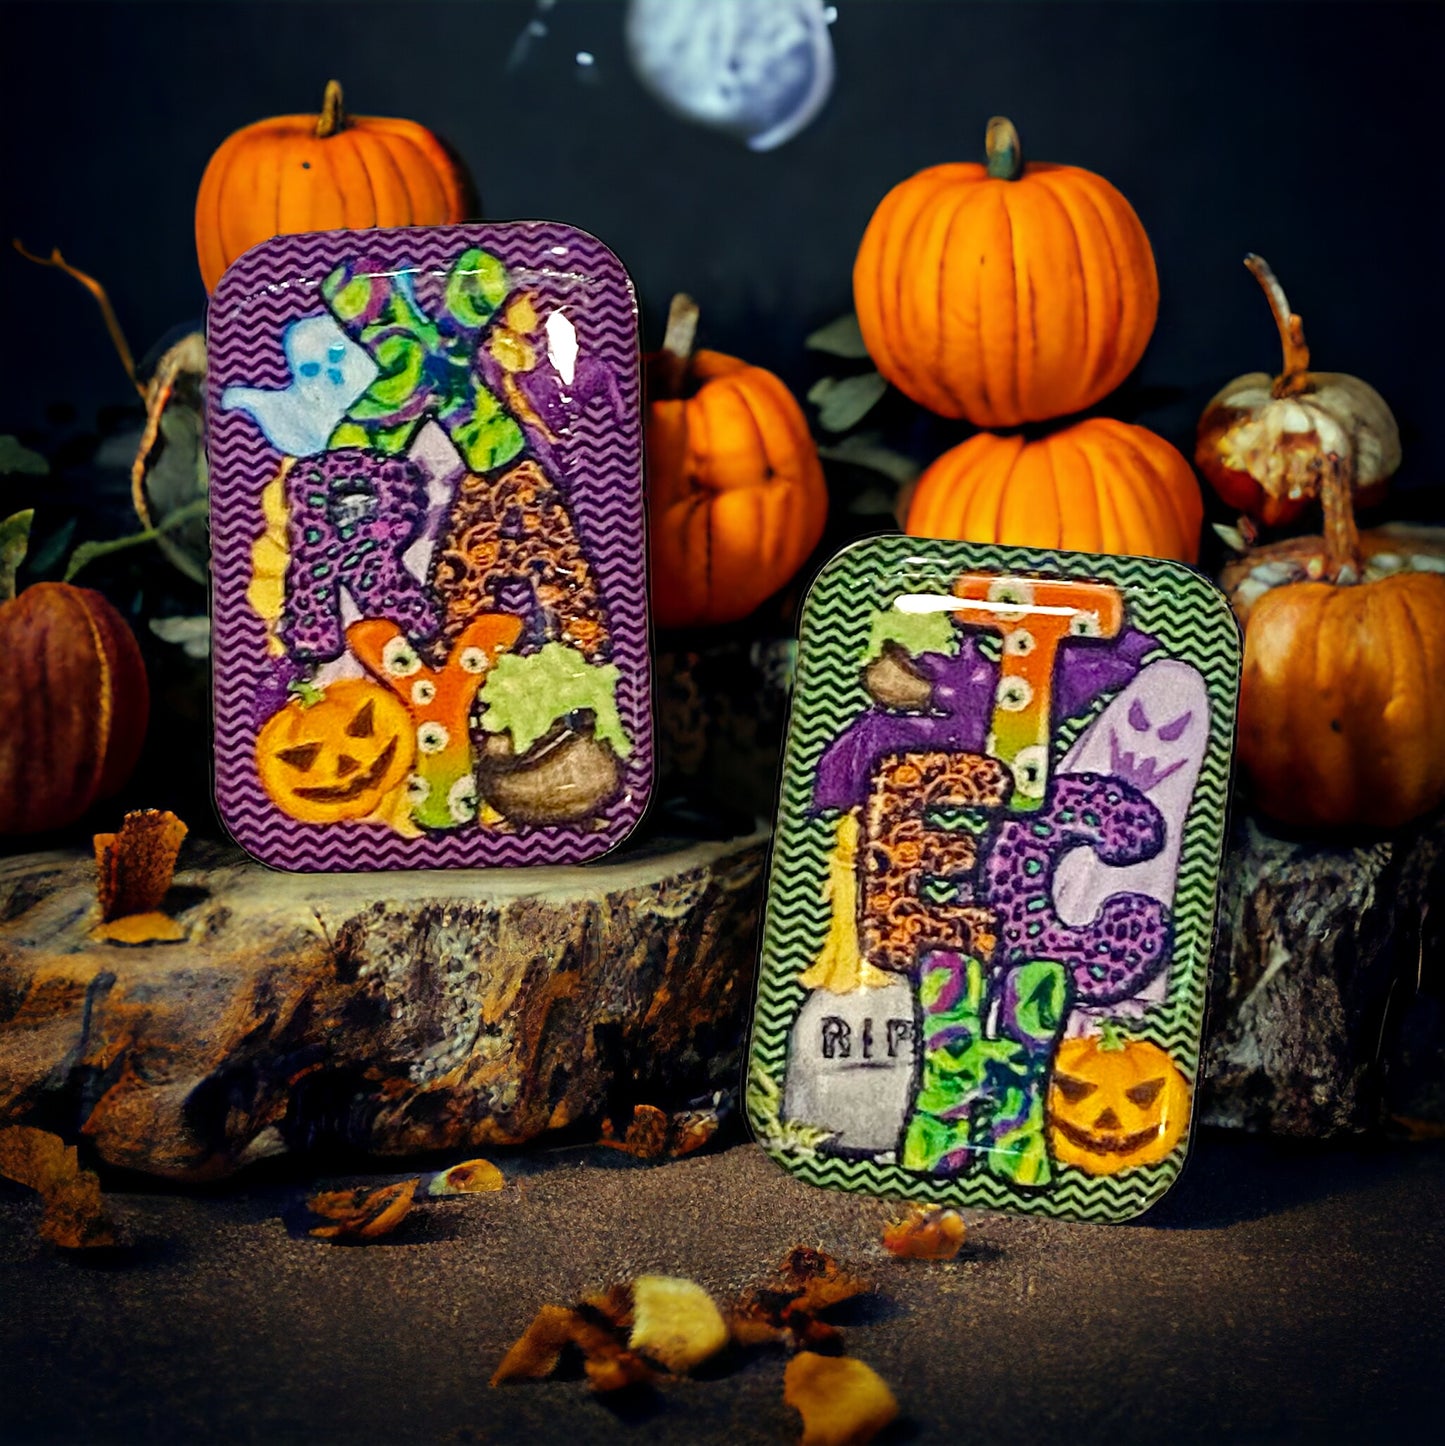 Halloween Xray Markers Customized with Initials